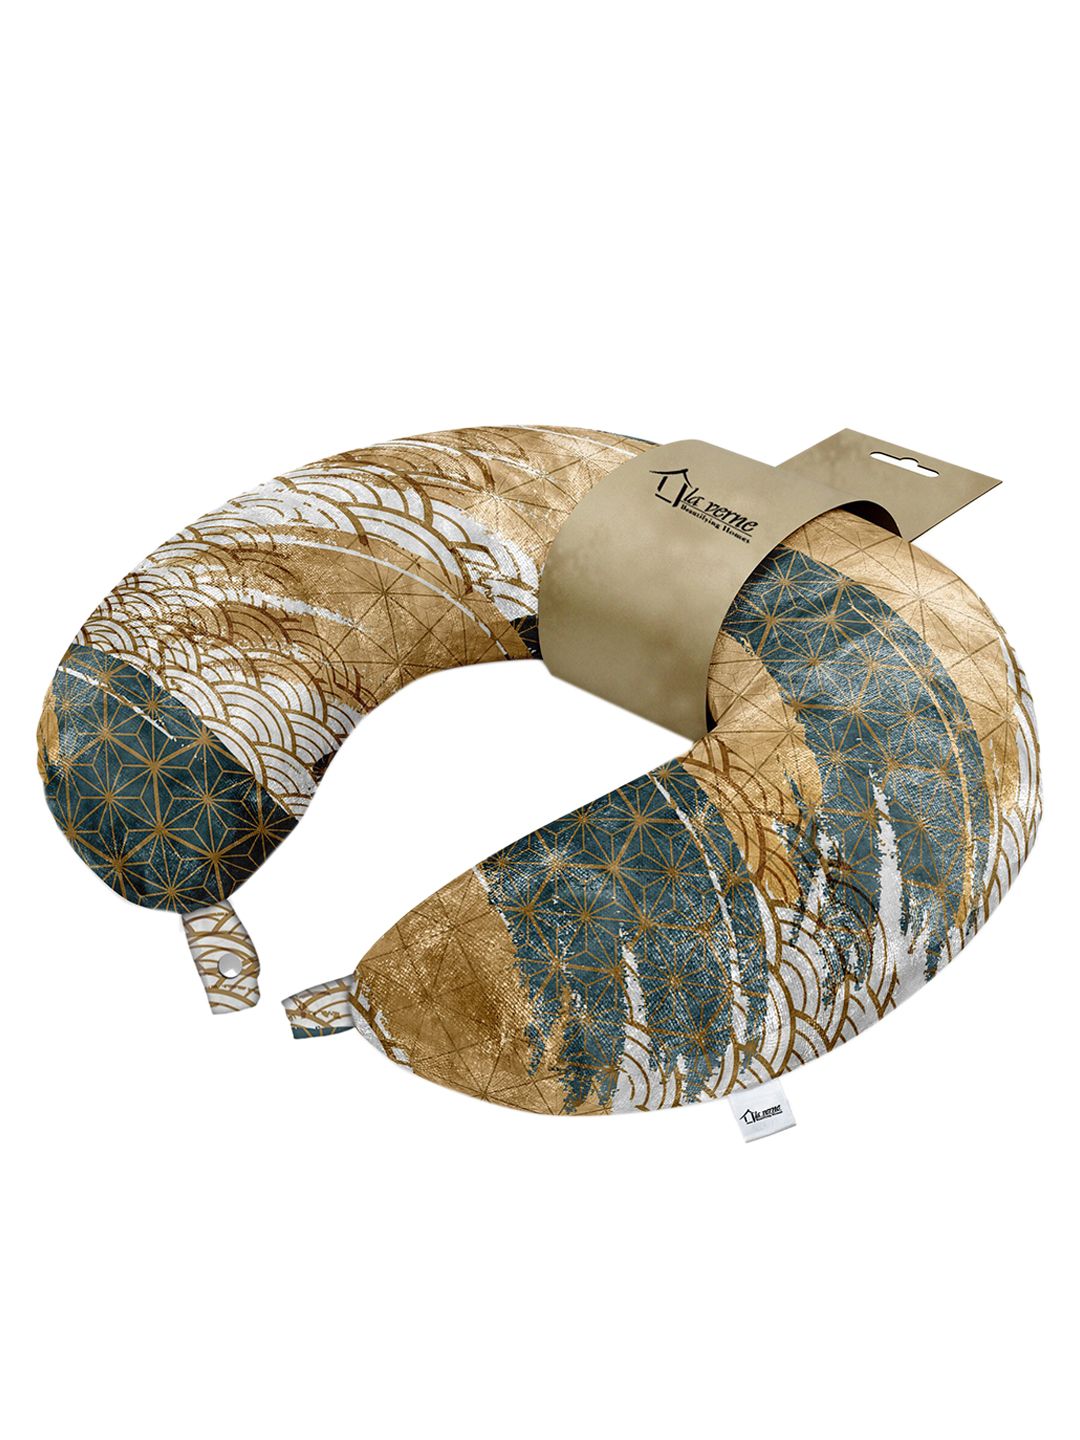 LA VERNE Beige And Green Printed Travel Neck Pillow Price in India